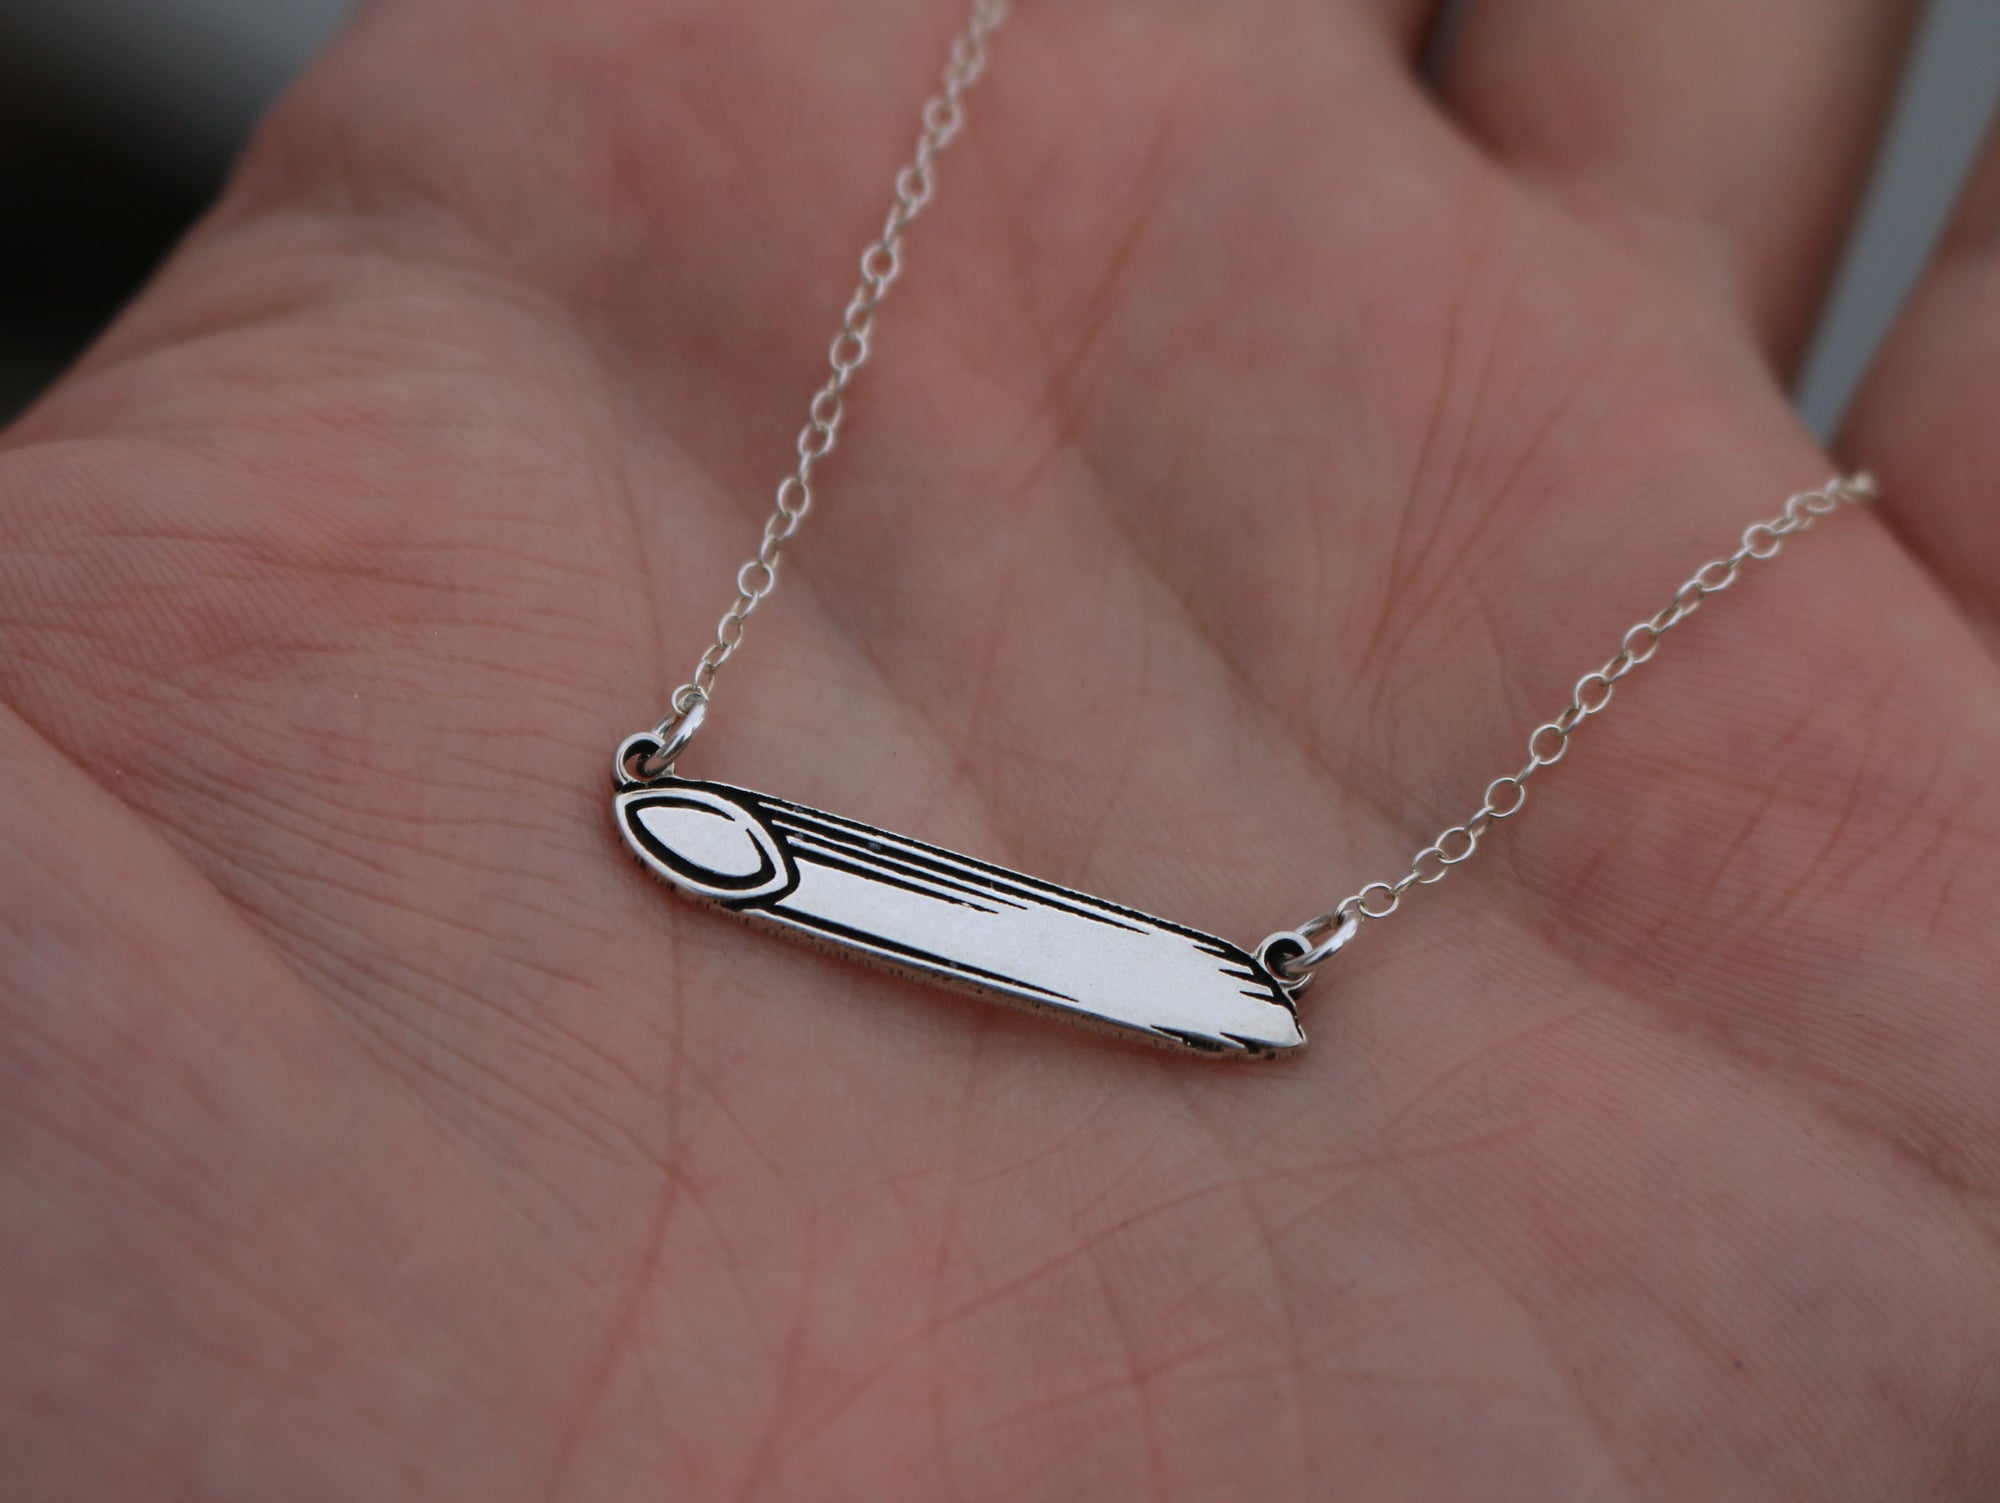 Penne Pasta Necklace - Sterling Silver